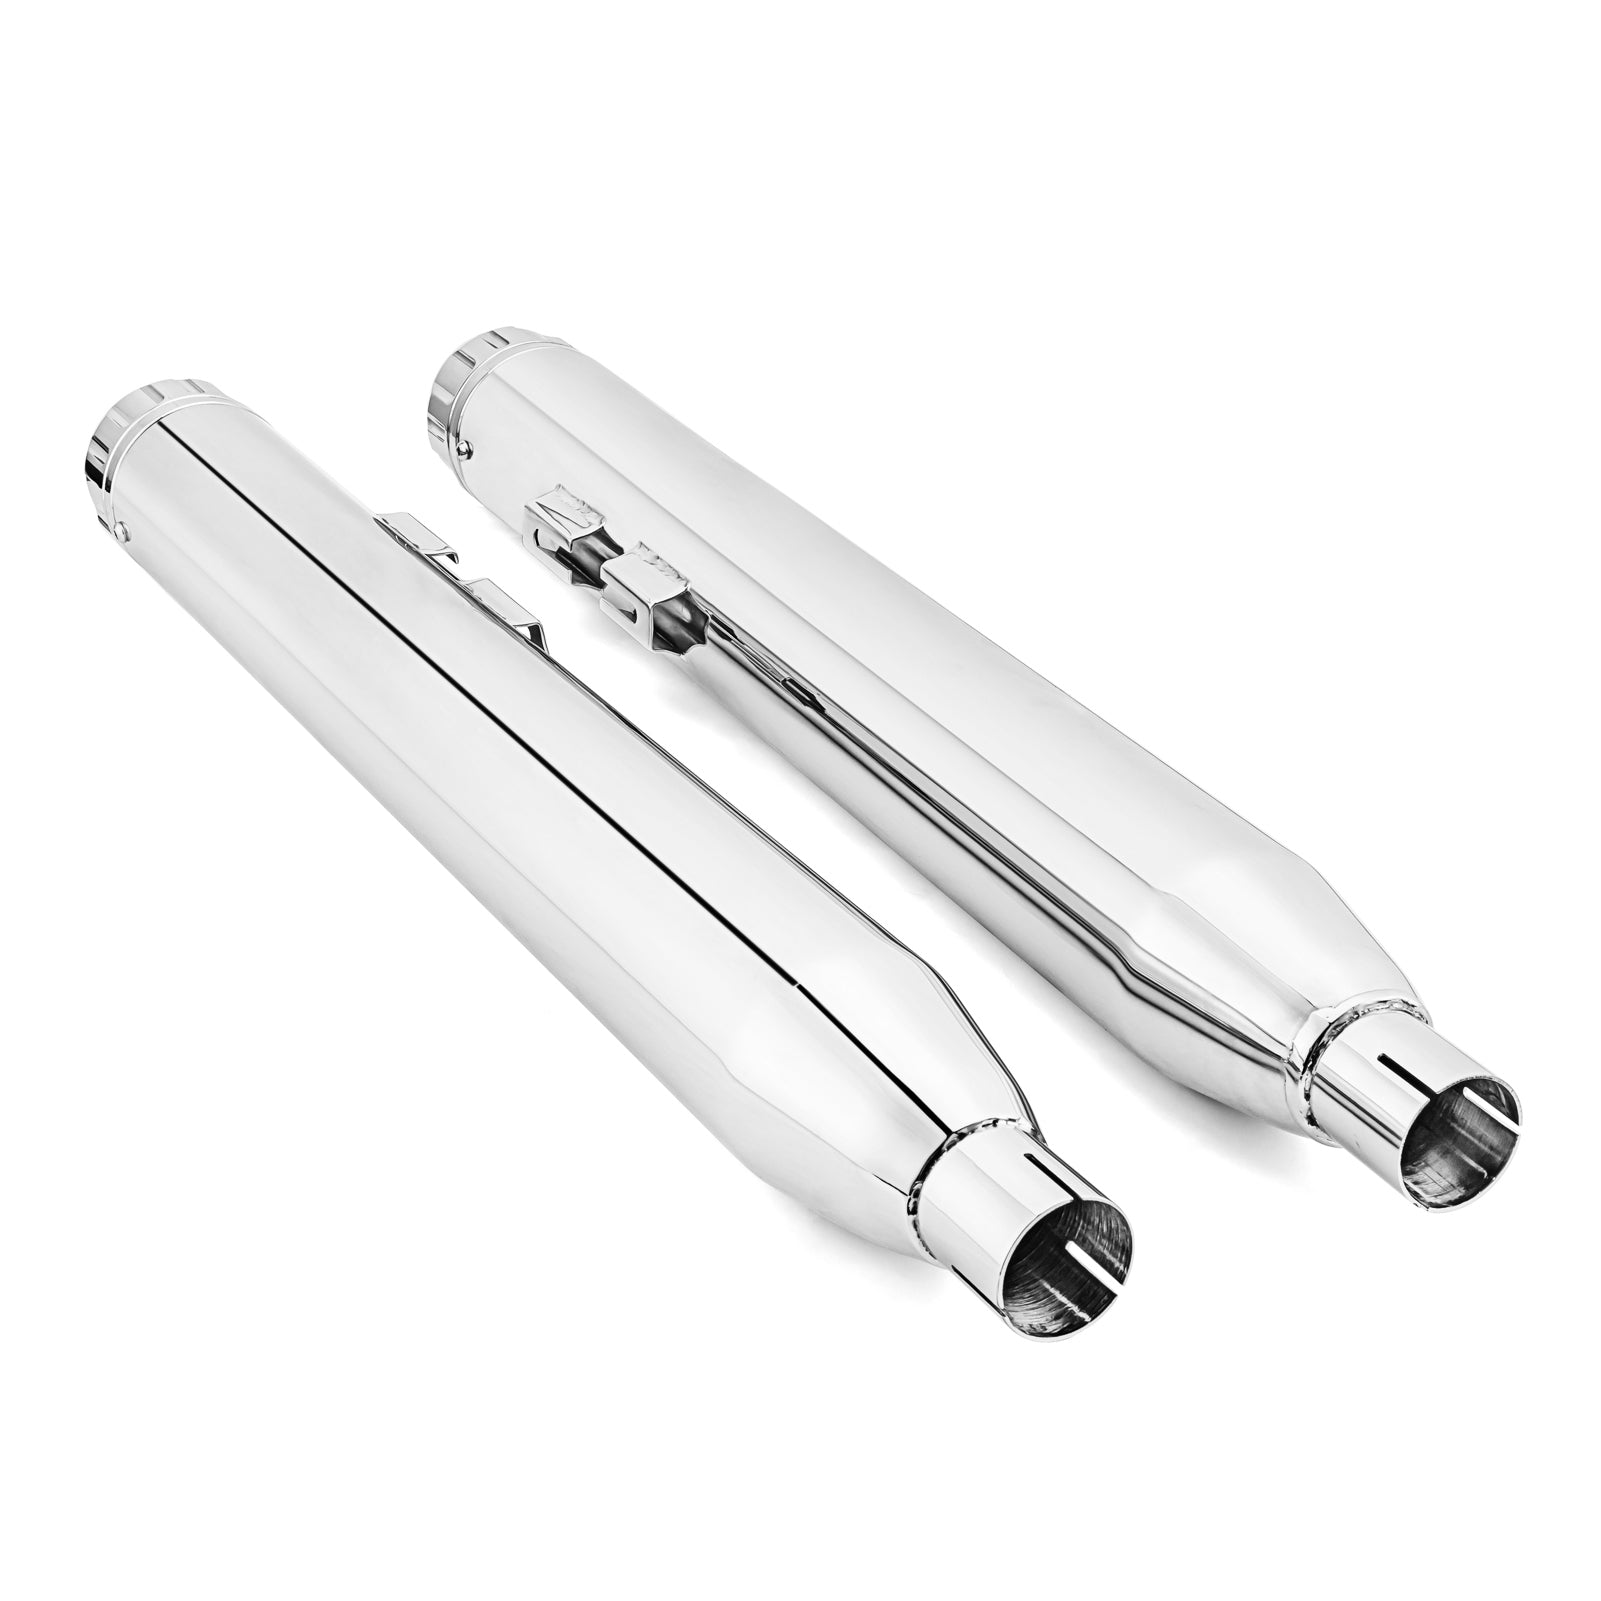 Chrome 3.5" Slip-On Mufflers Exhaust, Exhaust Pipes For 1995-2016 Harley Davidson Touring